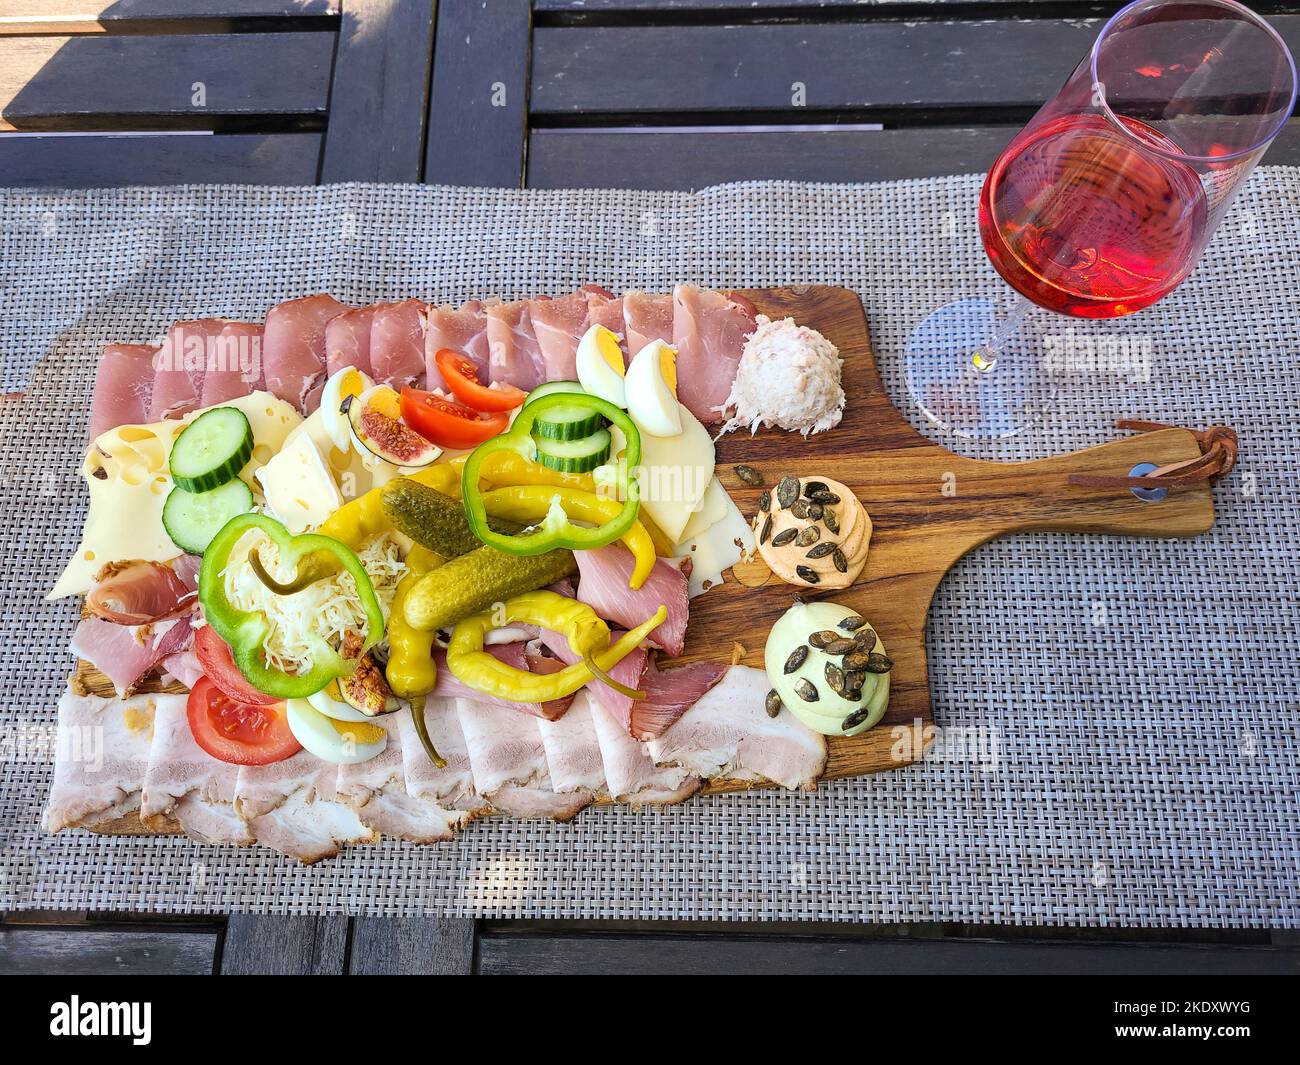 Austria, traditional cold plate with sausage, cheese, bacon and spreads called Brettljause with a glass of Schilcher wine Stock Photo